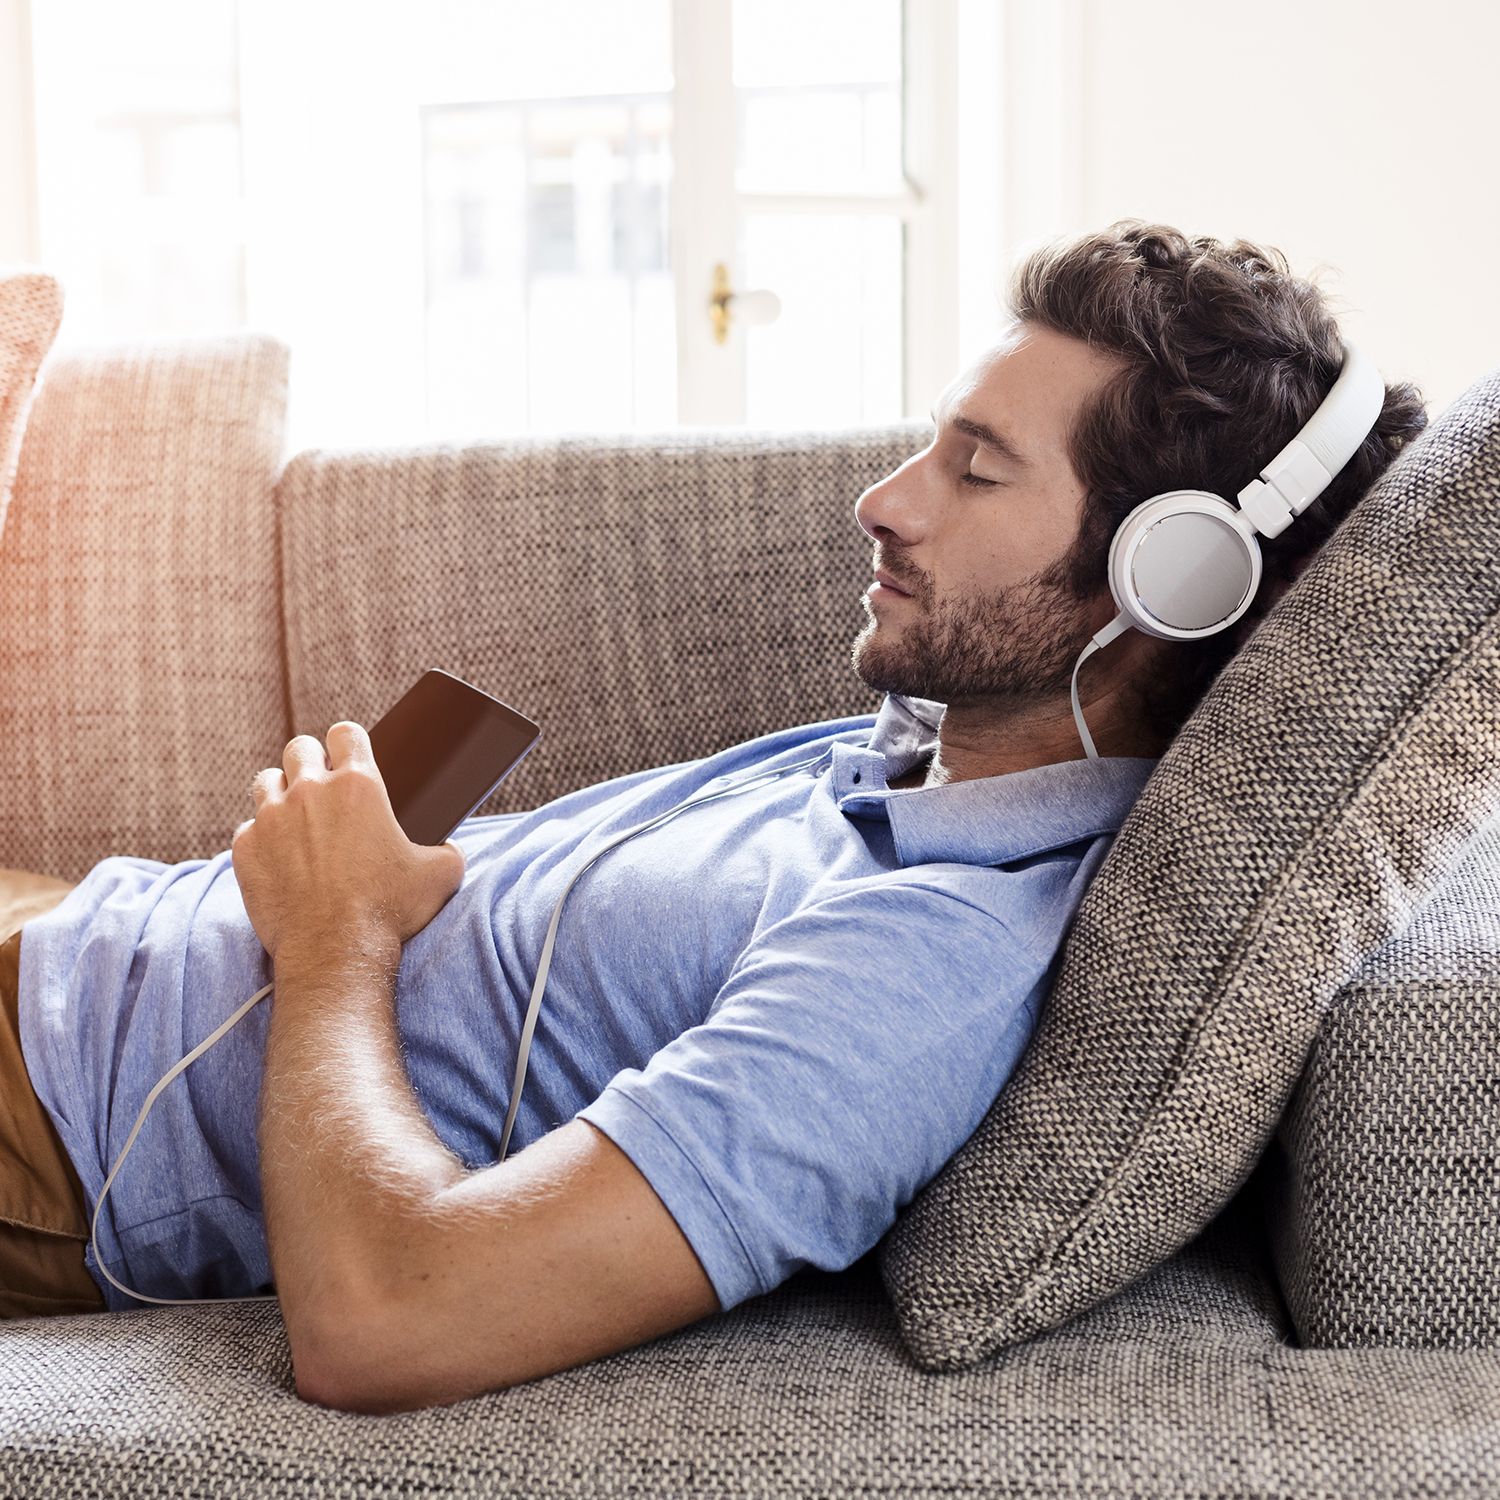 Music Therapy Has Many Benefits For Men's Health